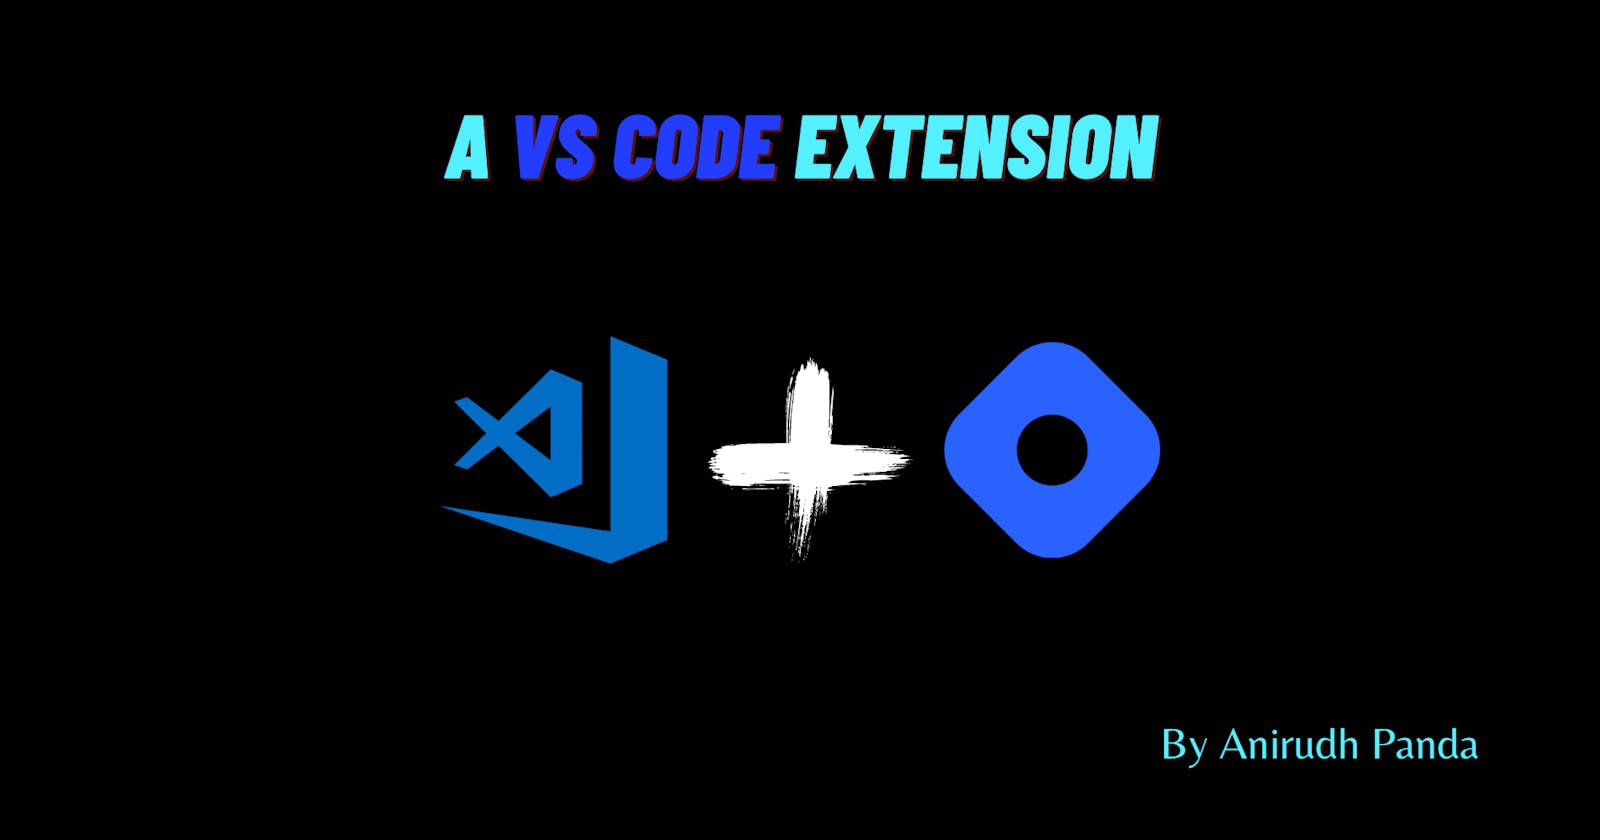 Personal VS Code+Hashnode extension (using RSS)